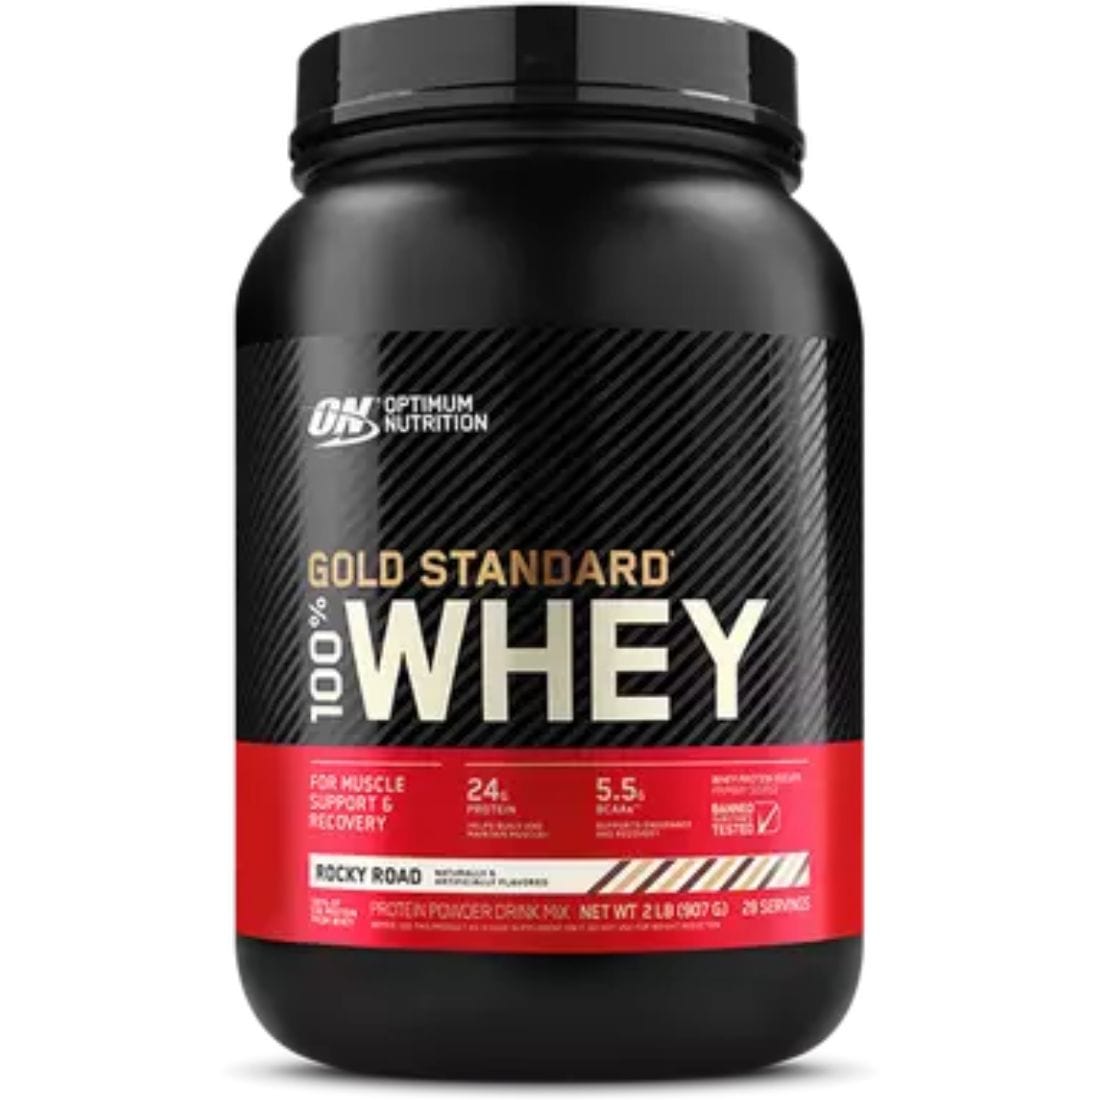 Optimum Gold Standard 100% Whey Protein, Gluten-Free, Banned Substance Tested